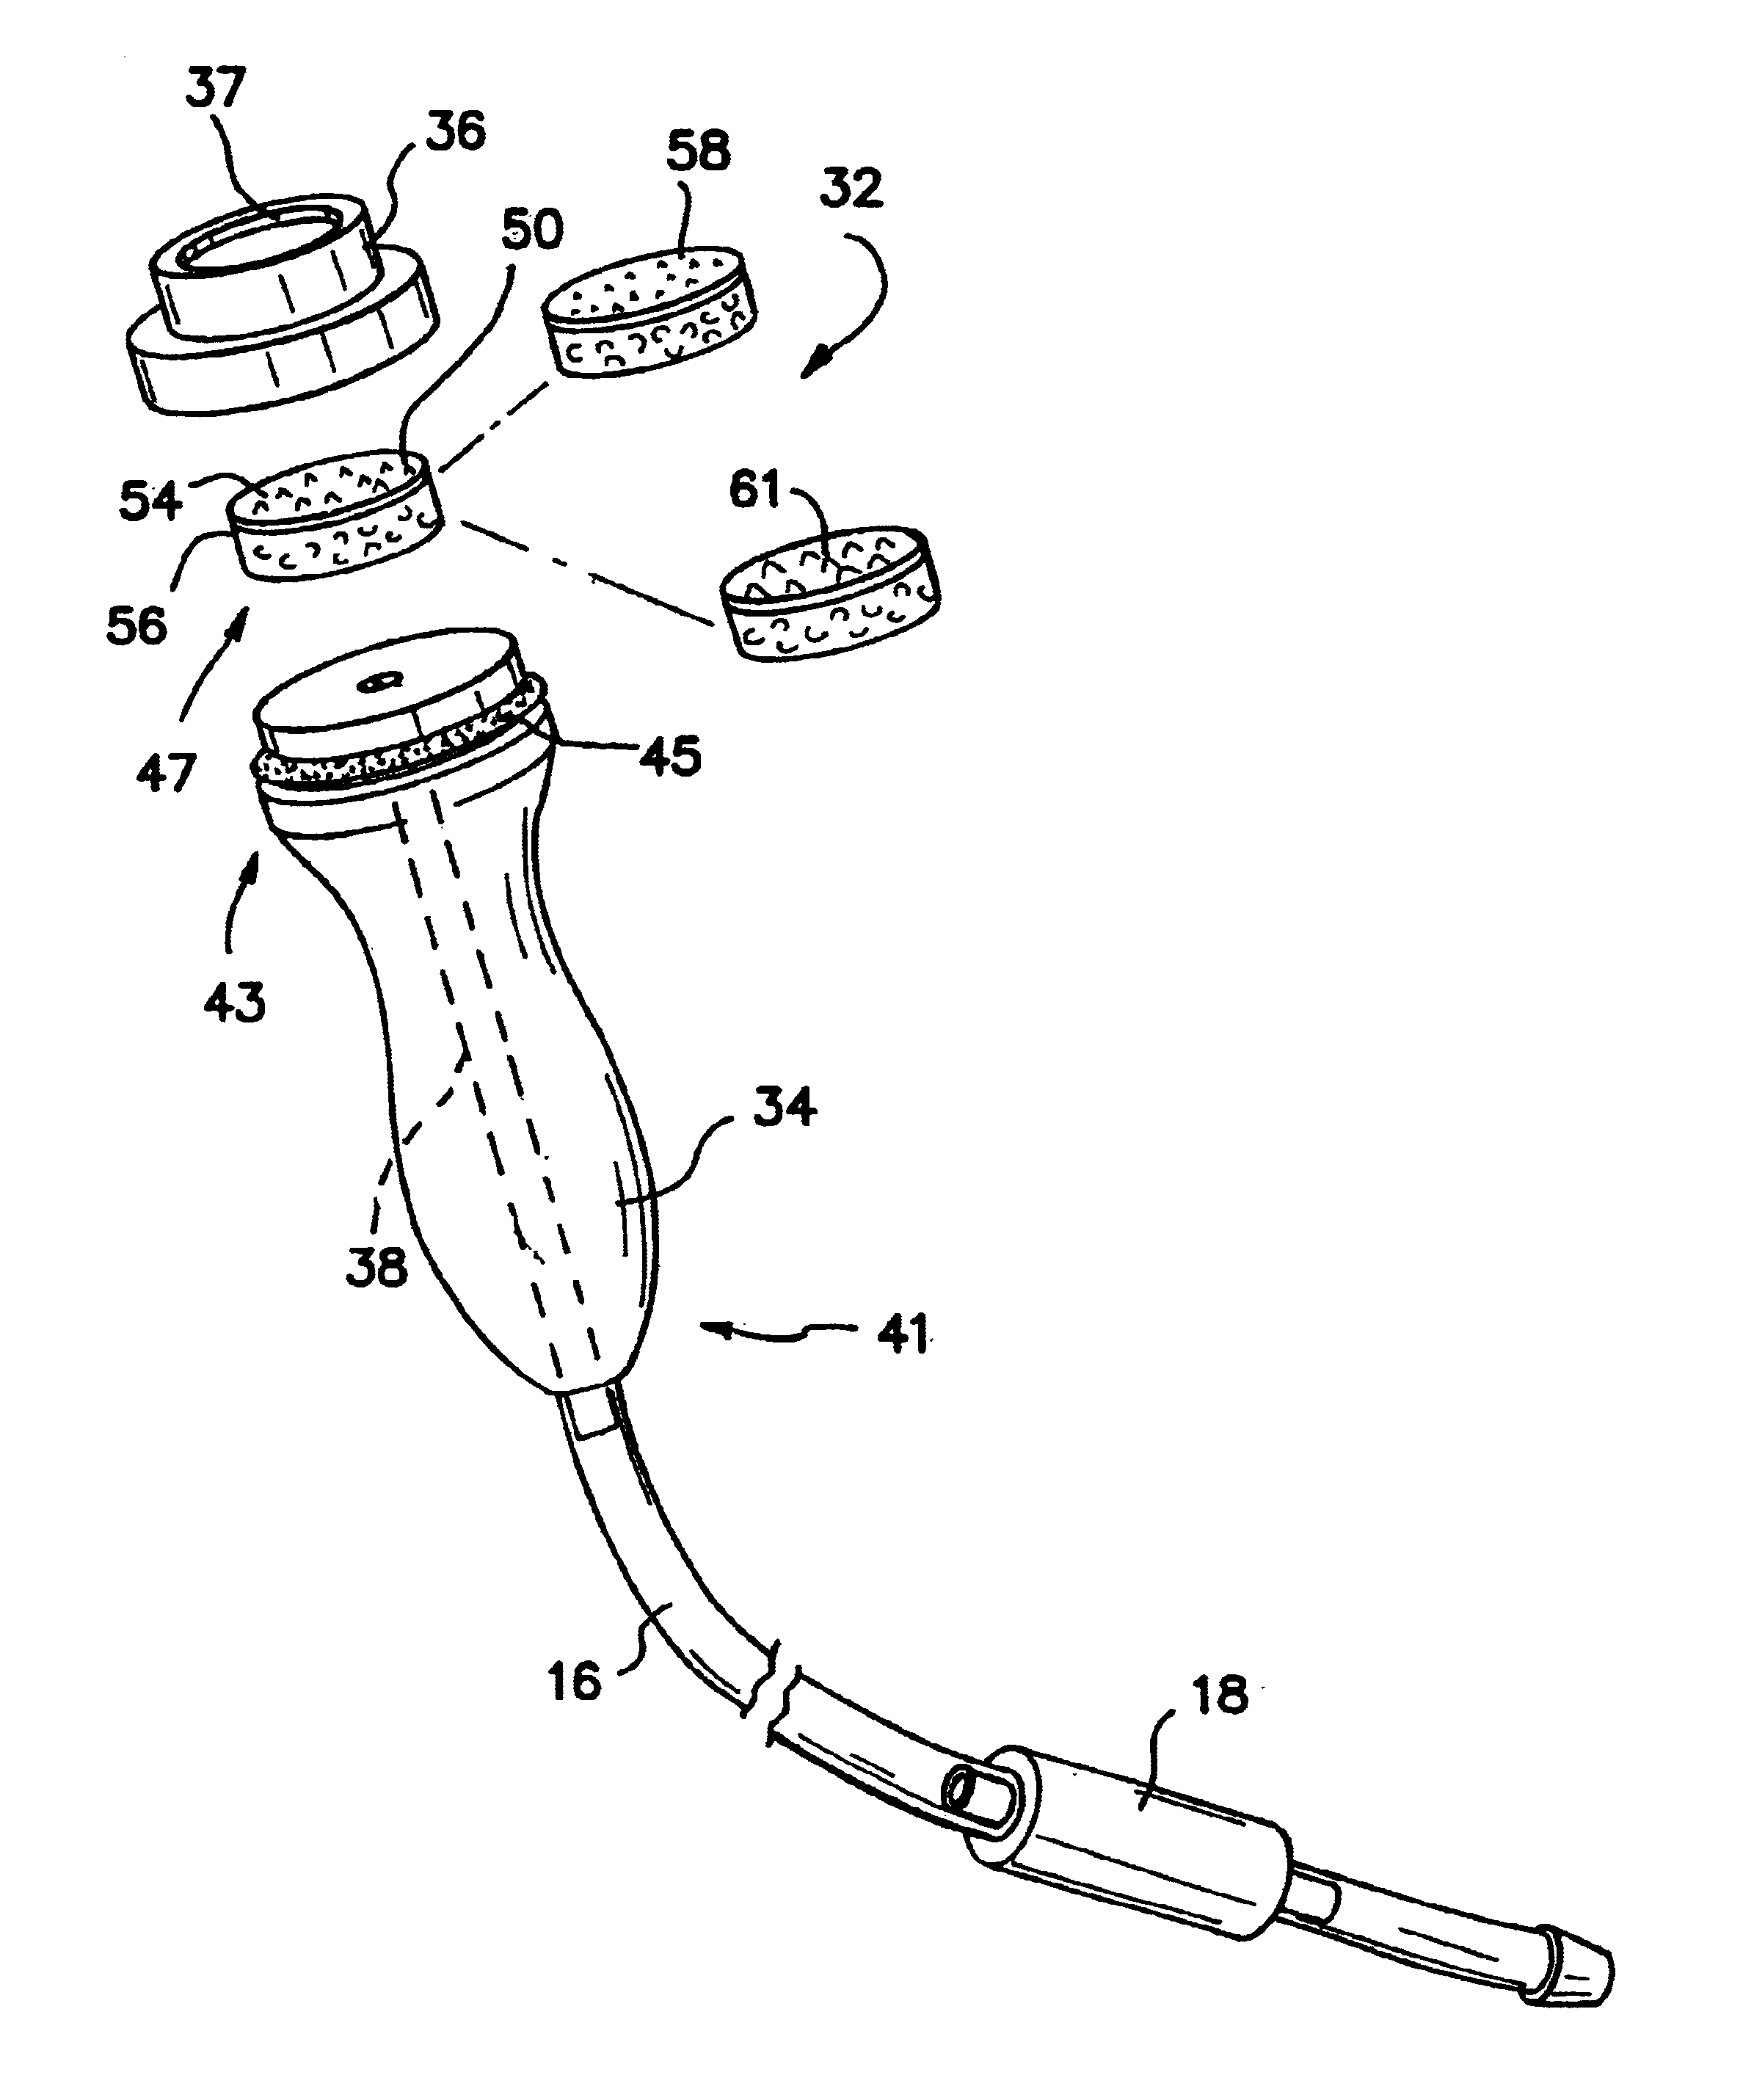 Apparatus and method for skin/surface abrasion